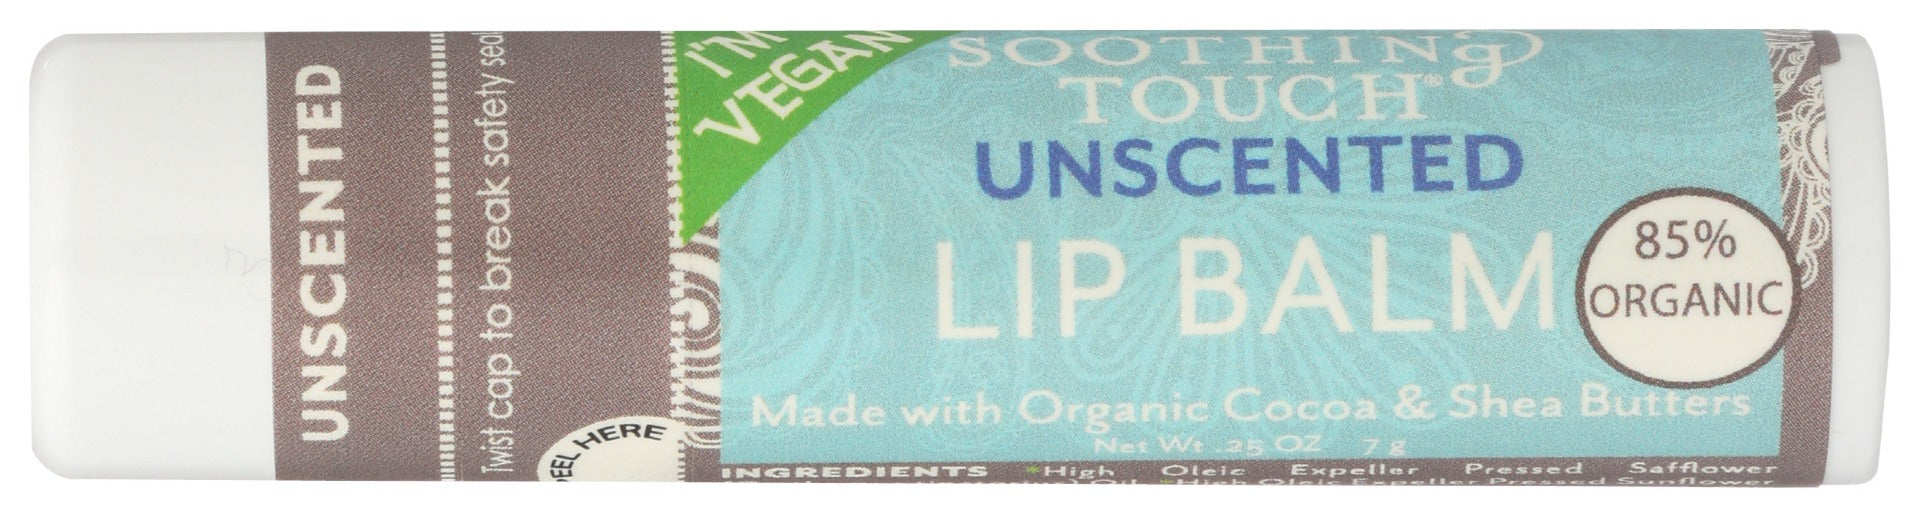 SOOTHING TOUCH: Lip Balm Vegan Unscented Tub, 0.25 OZ